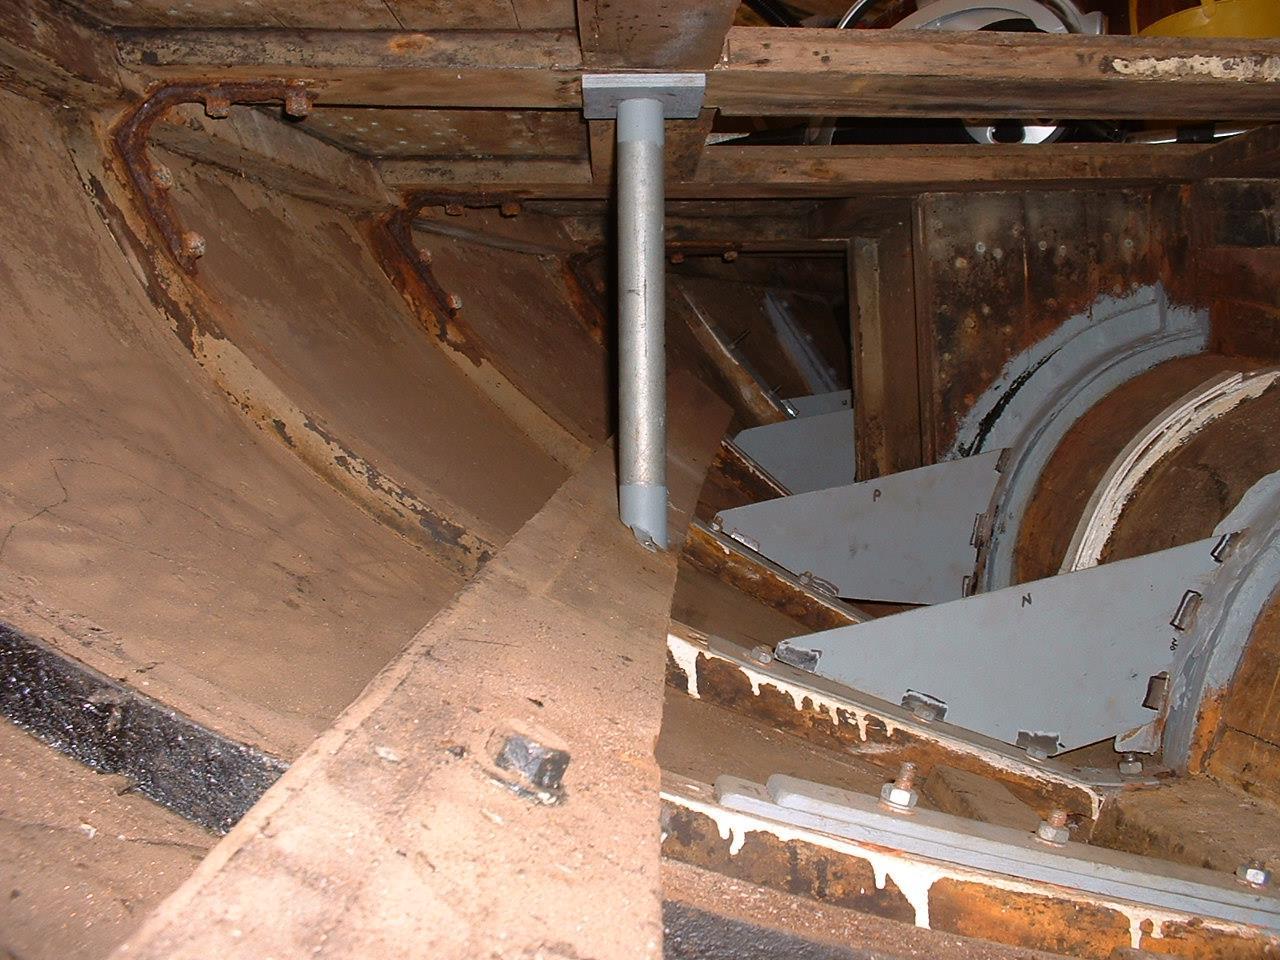 The floors and deck support shown in Fig.3 now removed and replaced with mild steel plate coated with epoxy primer. The threaded end of the new galvanised bolts can be seen. Once the new plates have been welded to the original remaining sections around the tunnel, they will again receive numerous coatings of epoxy primer, undercoat and topcoat.